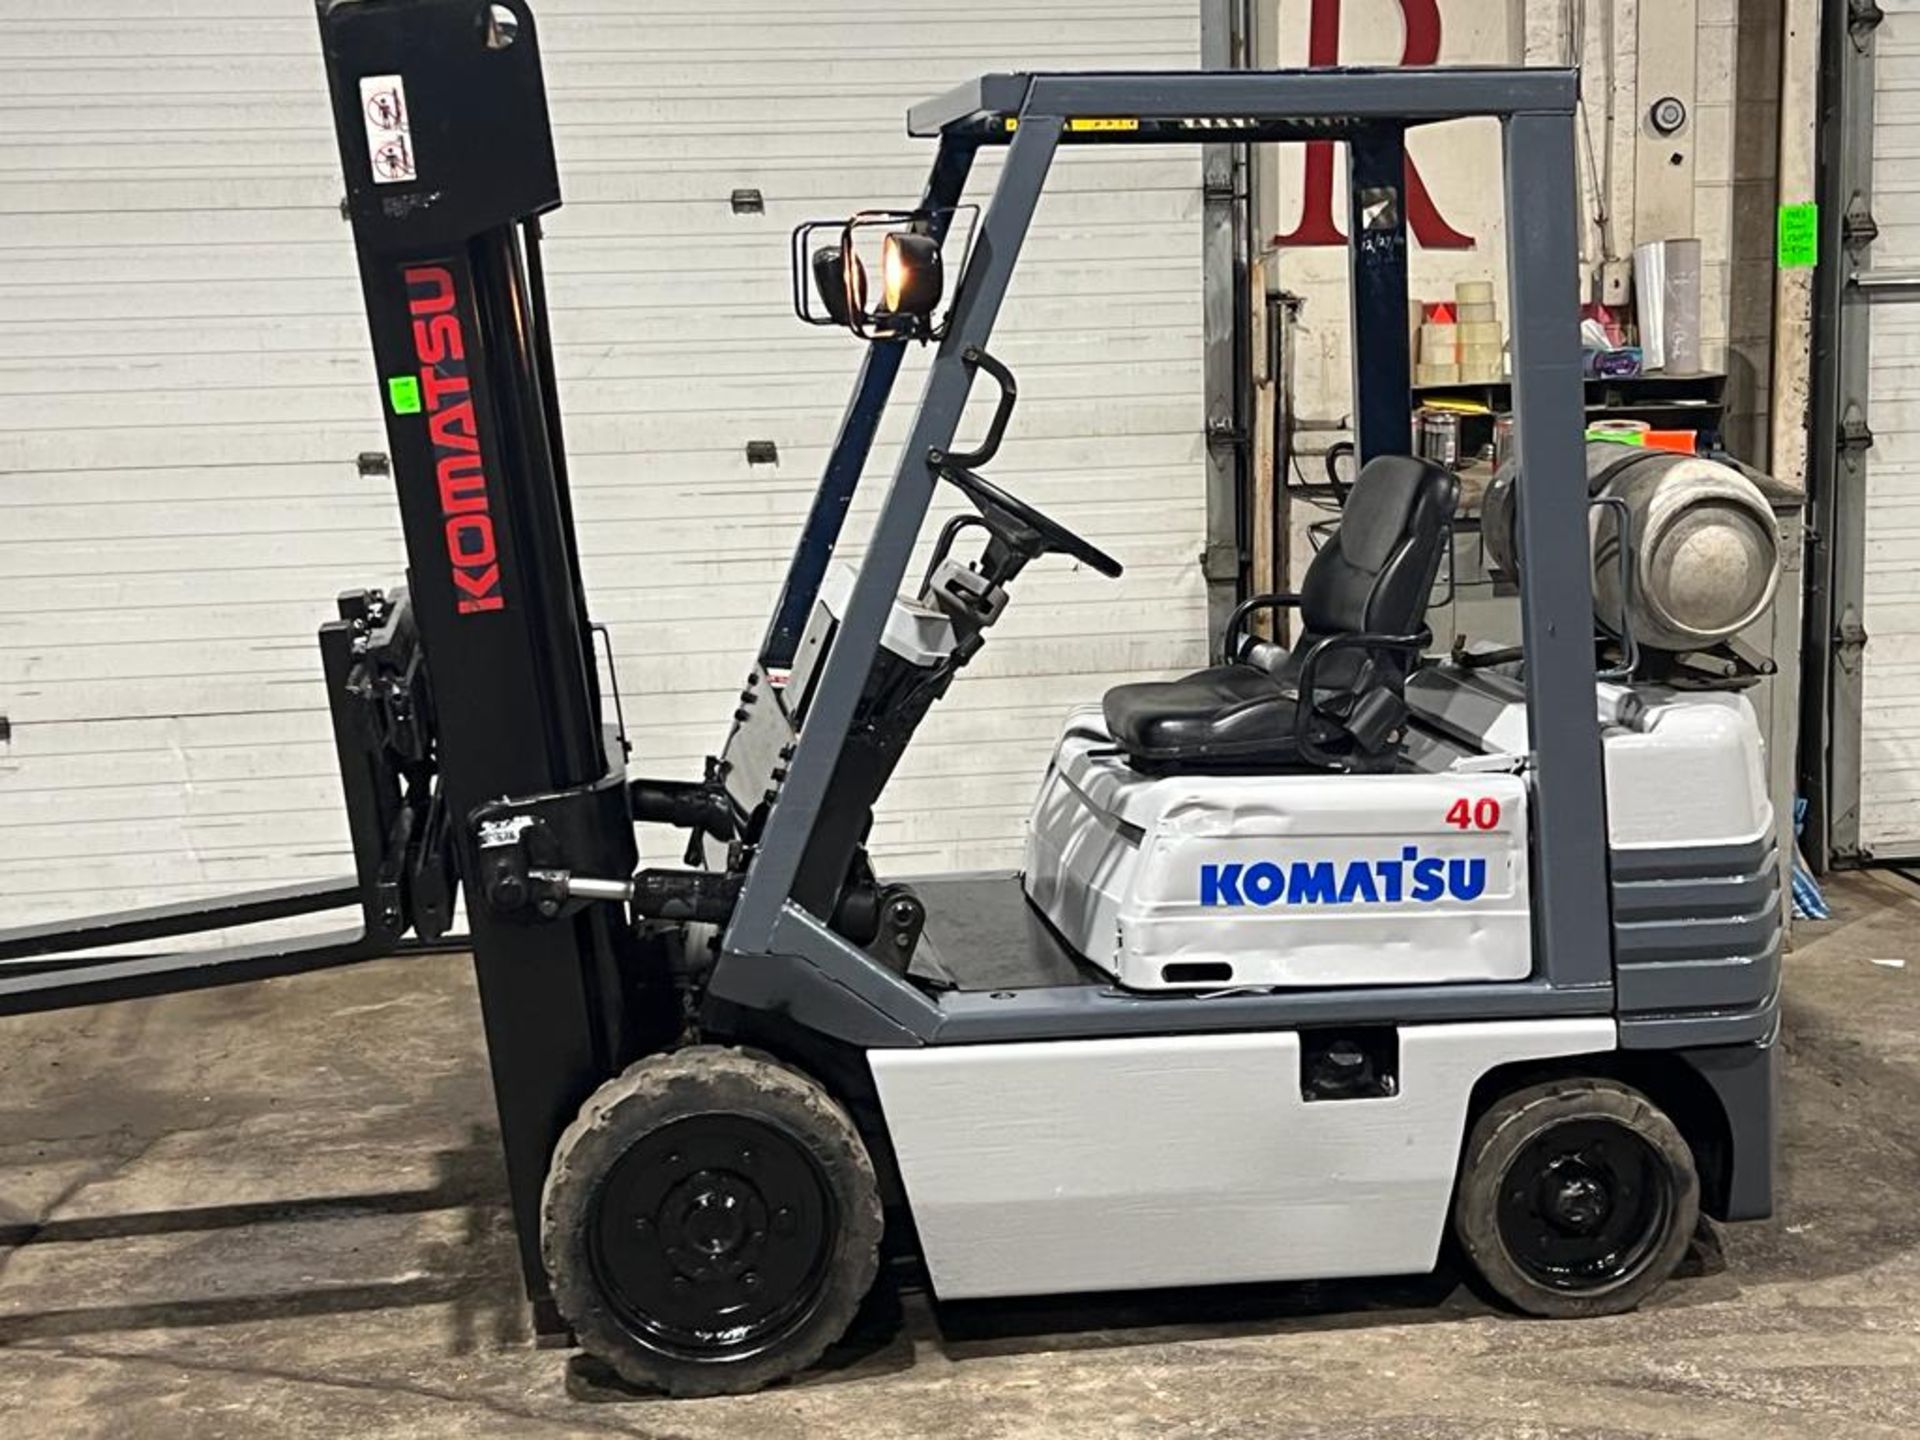 Komatsu 40 - 4,000lbs Capacity Forklift LPG (propane) with Sideshift & 3-stage Mast with LOW HOURS -